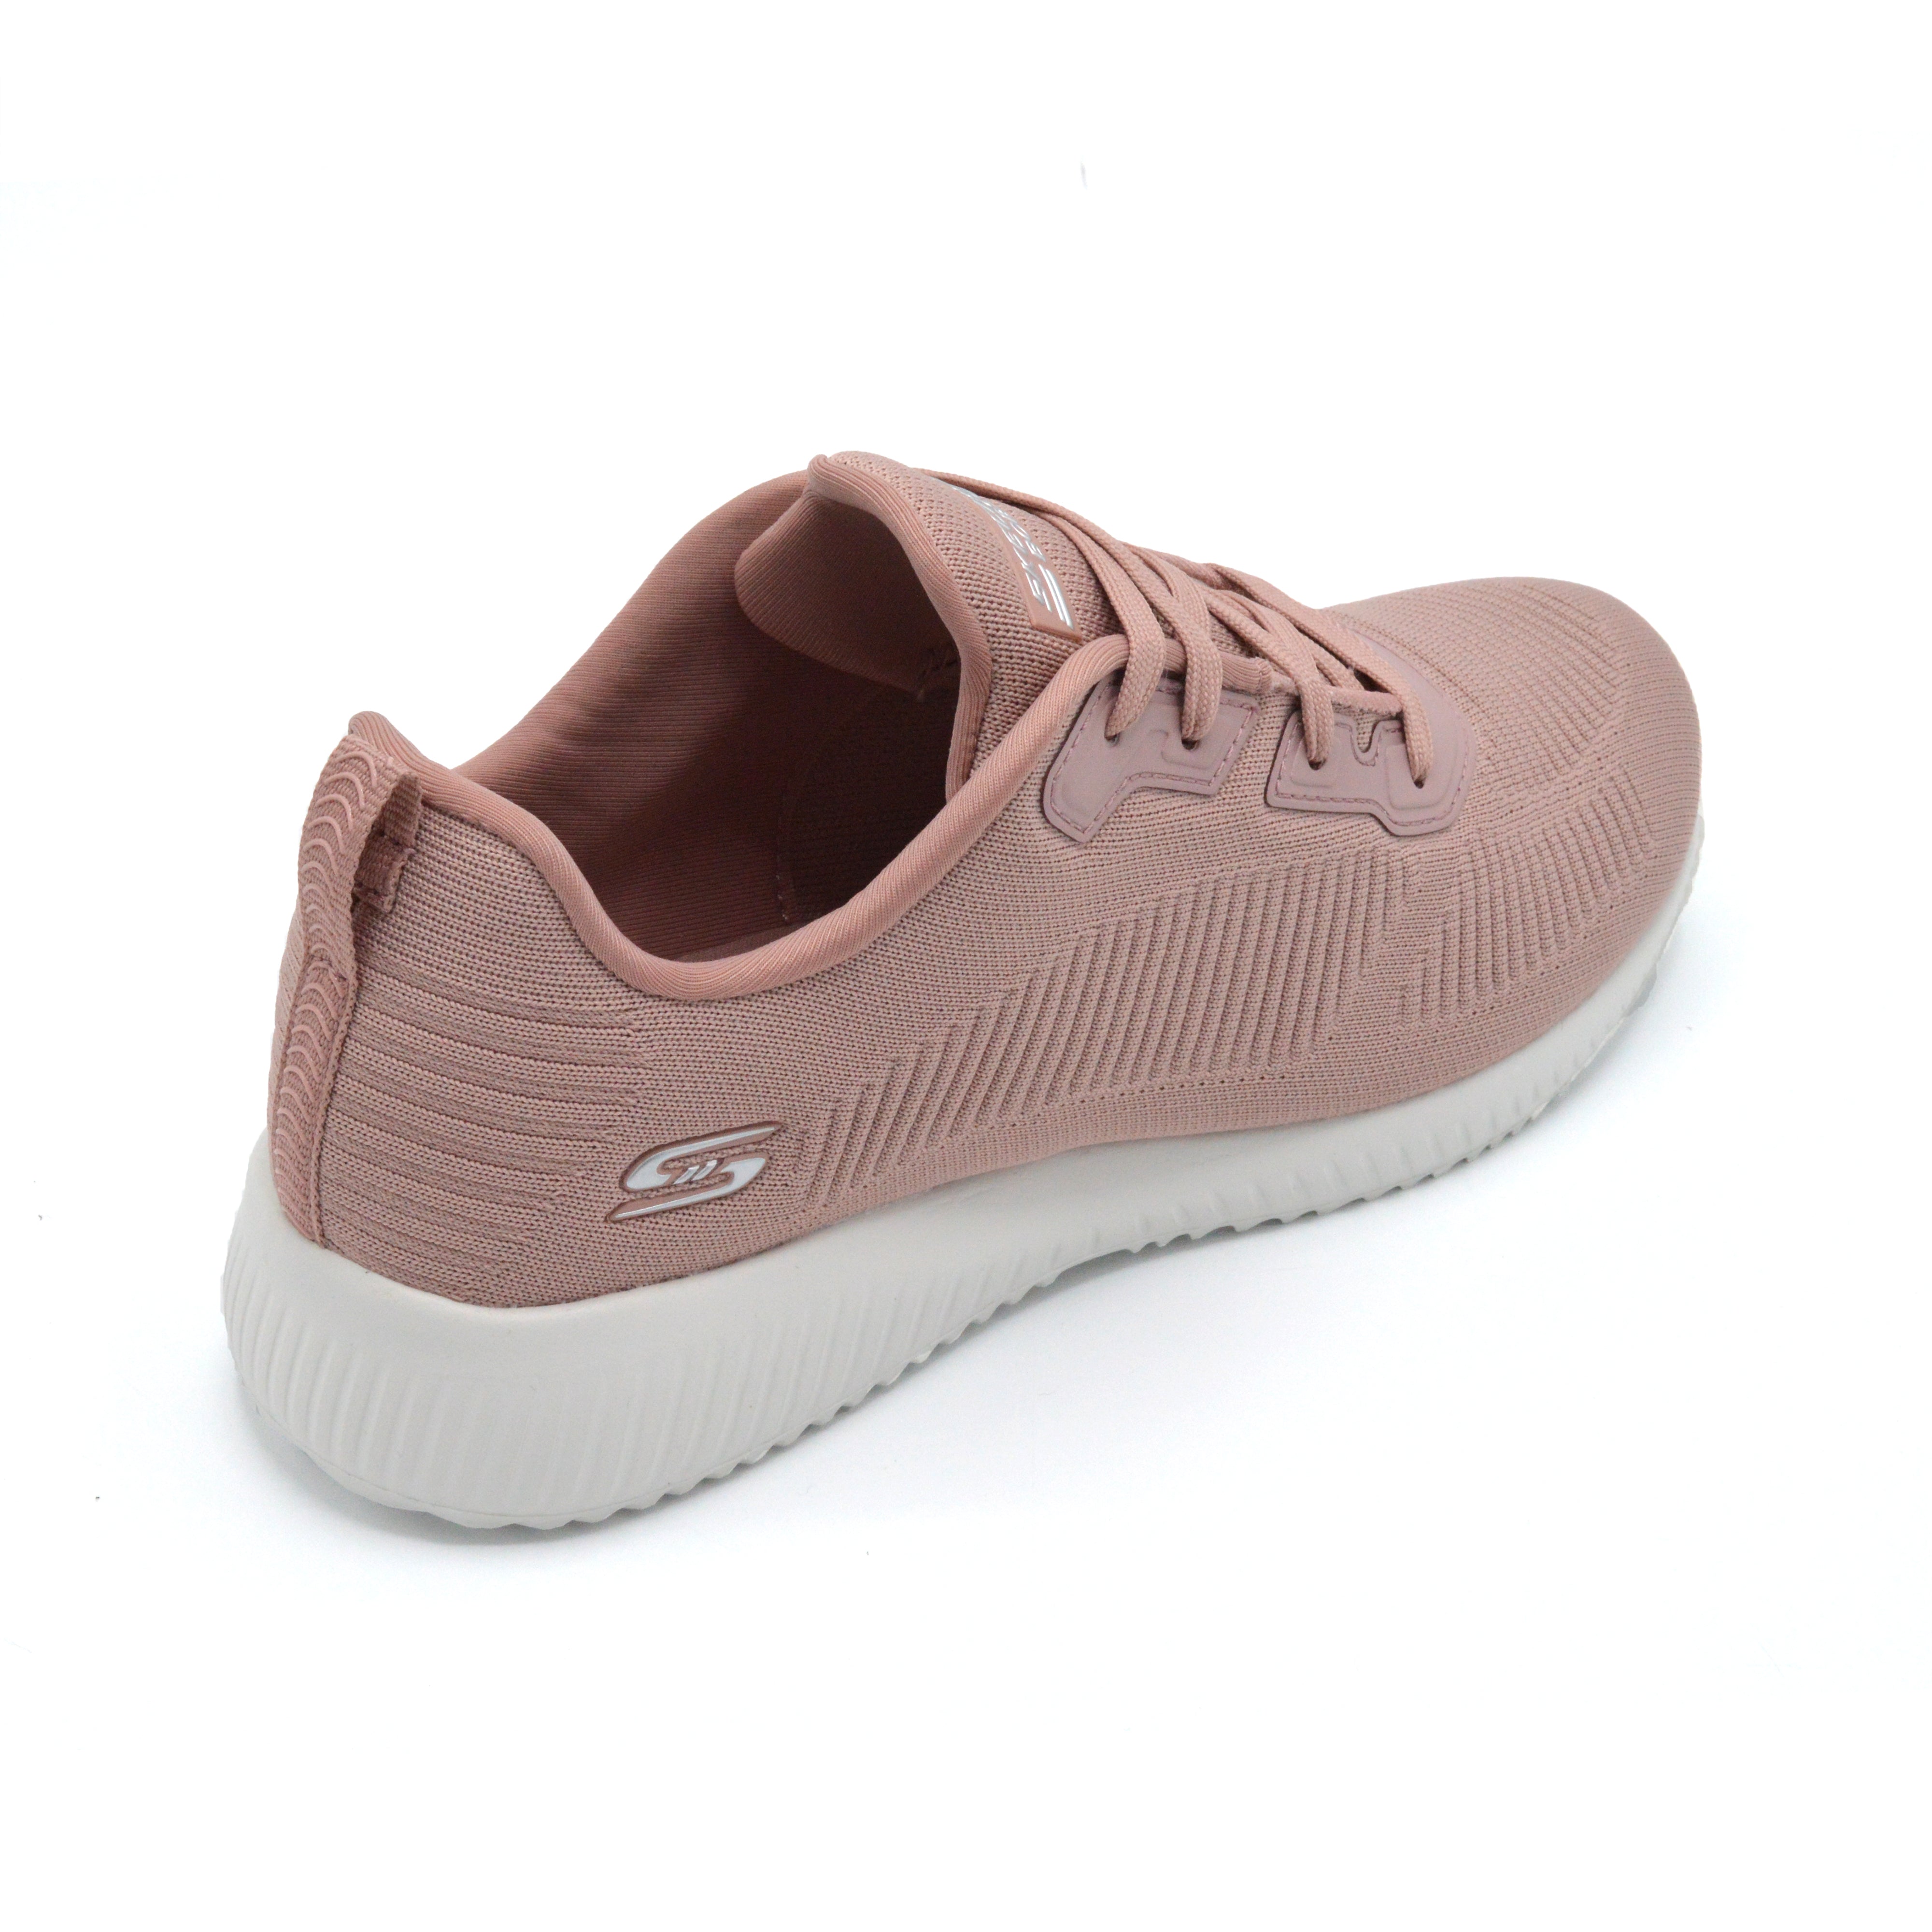 Skechers Extra Wide Ladies Trainer Lace Up